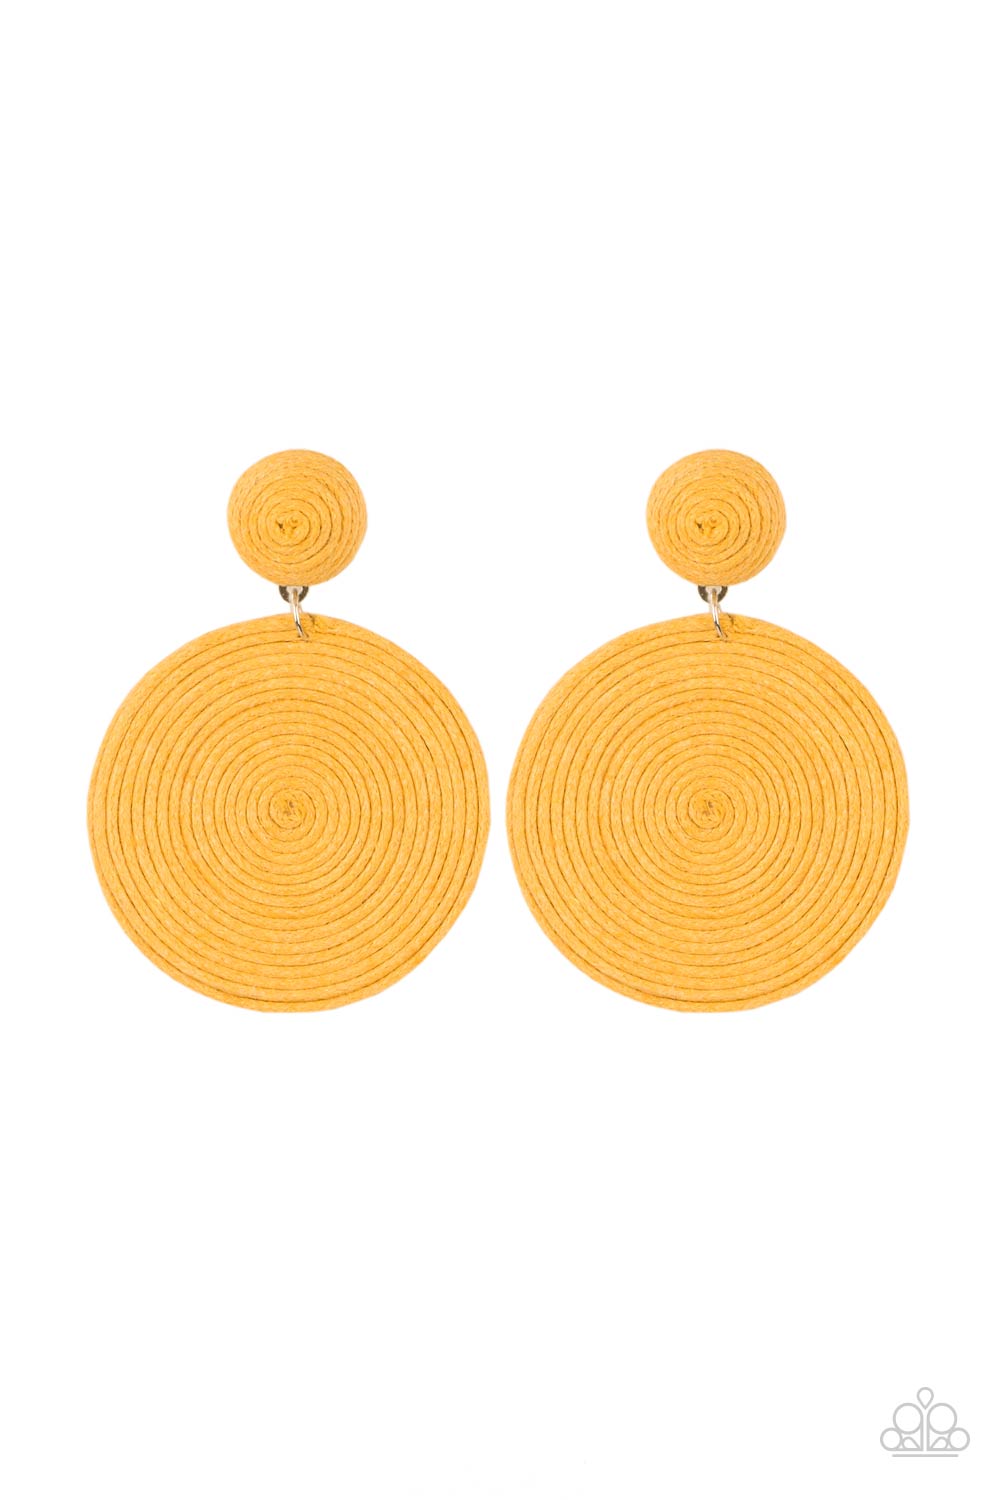 Circulate the Room - Yellow Earrings - Lady T Accessories